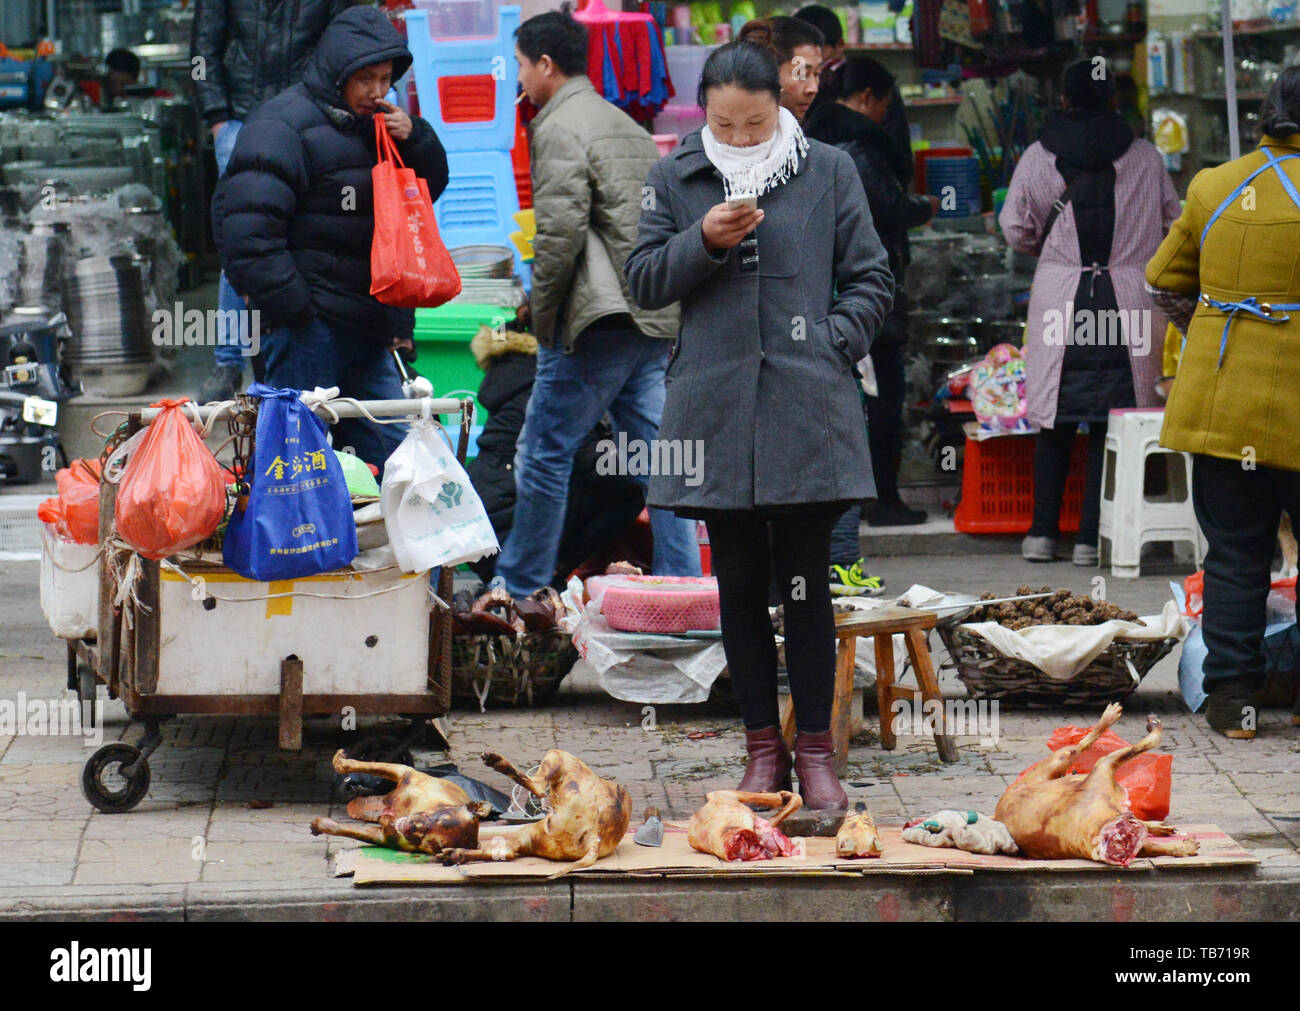 Dog meat is popular in South West China. Stock Photo